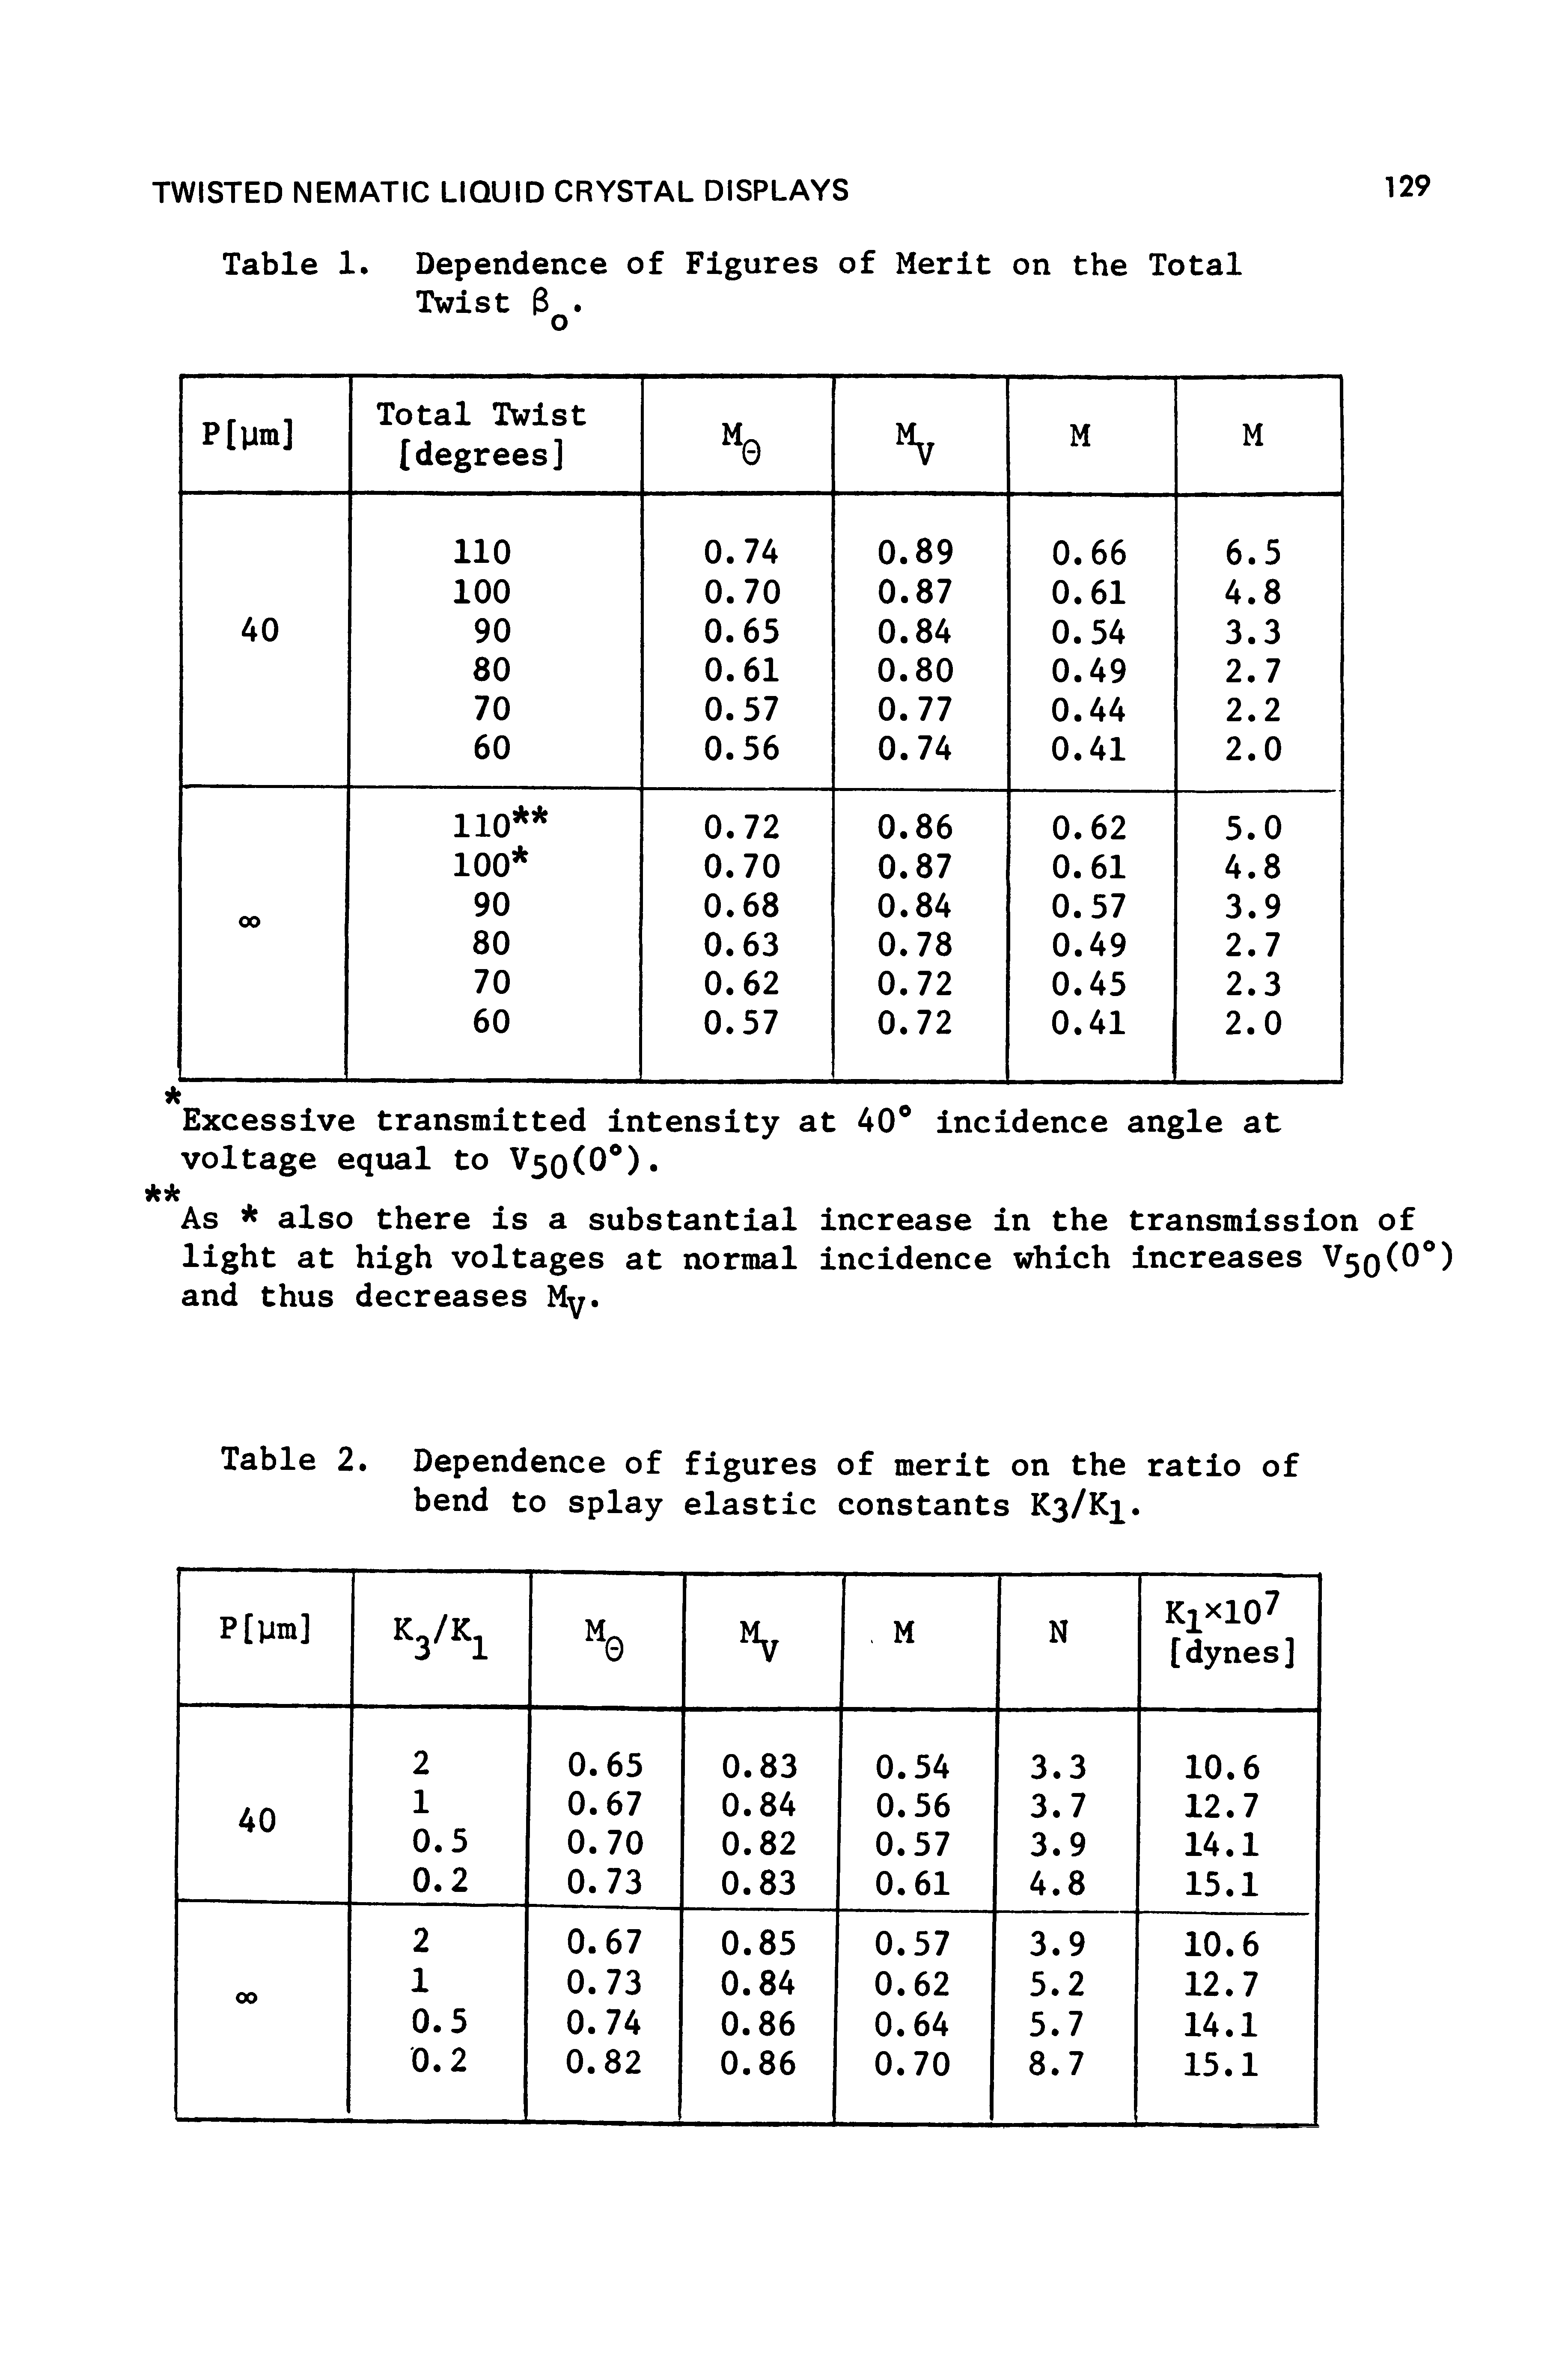 Table 2. Dependence of figures of merit on the ratio of bend to splay elastic constants K3/K1.